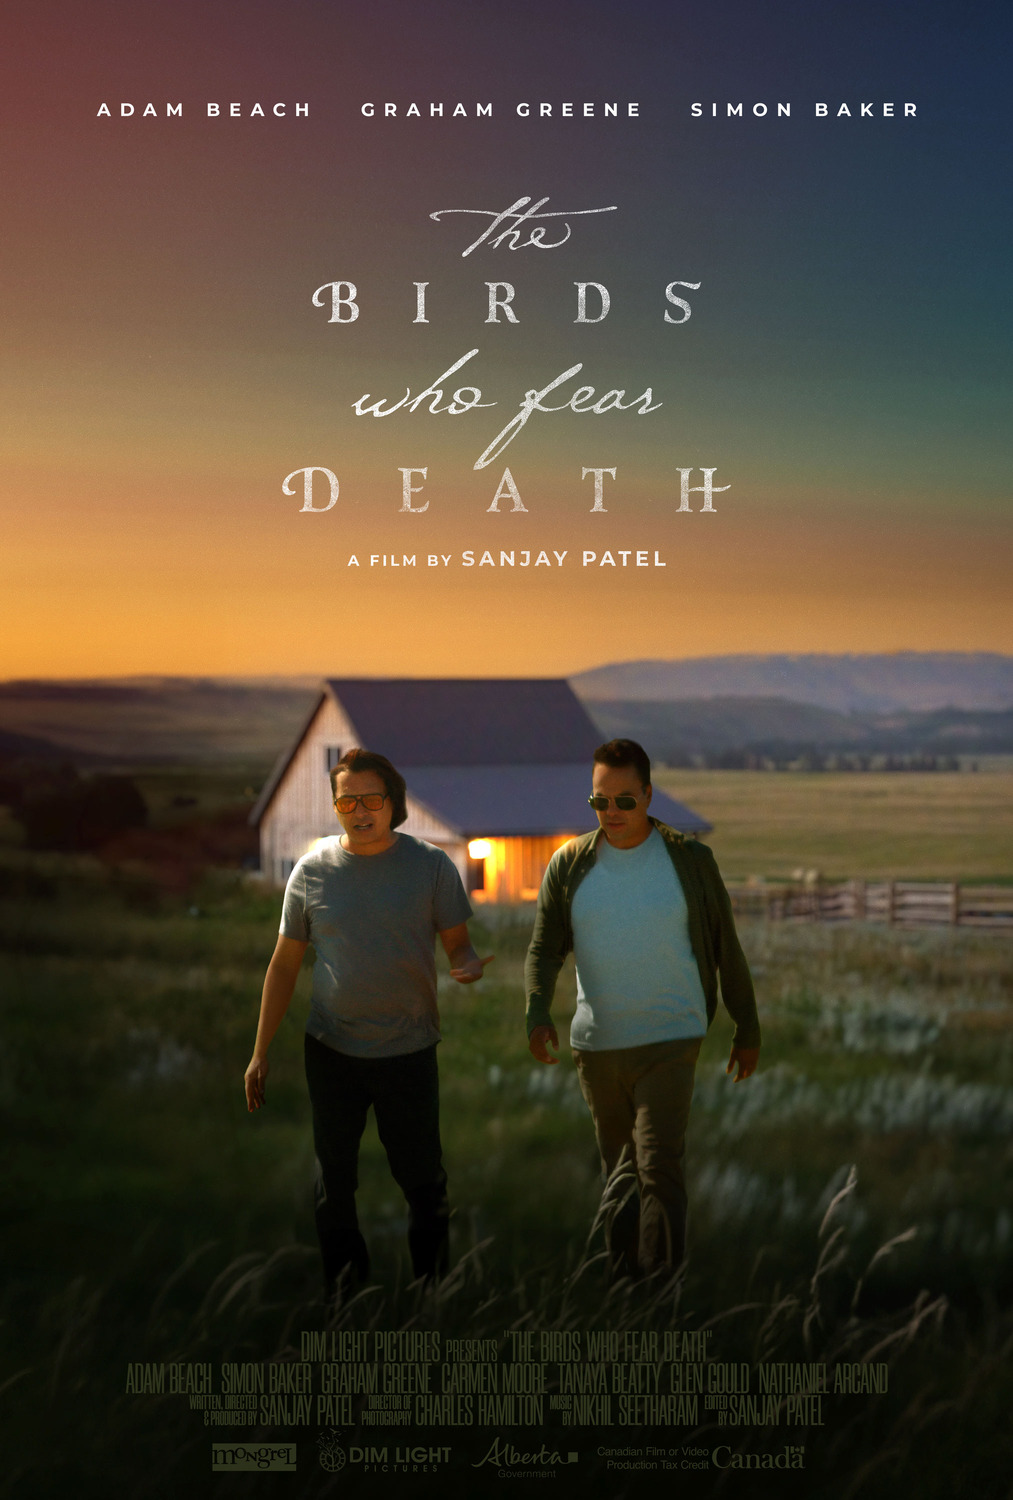 Extra Large Movie Poster Image for The Birds Who Fear Death 